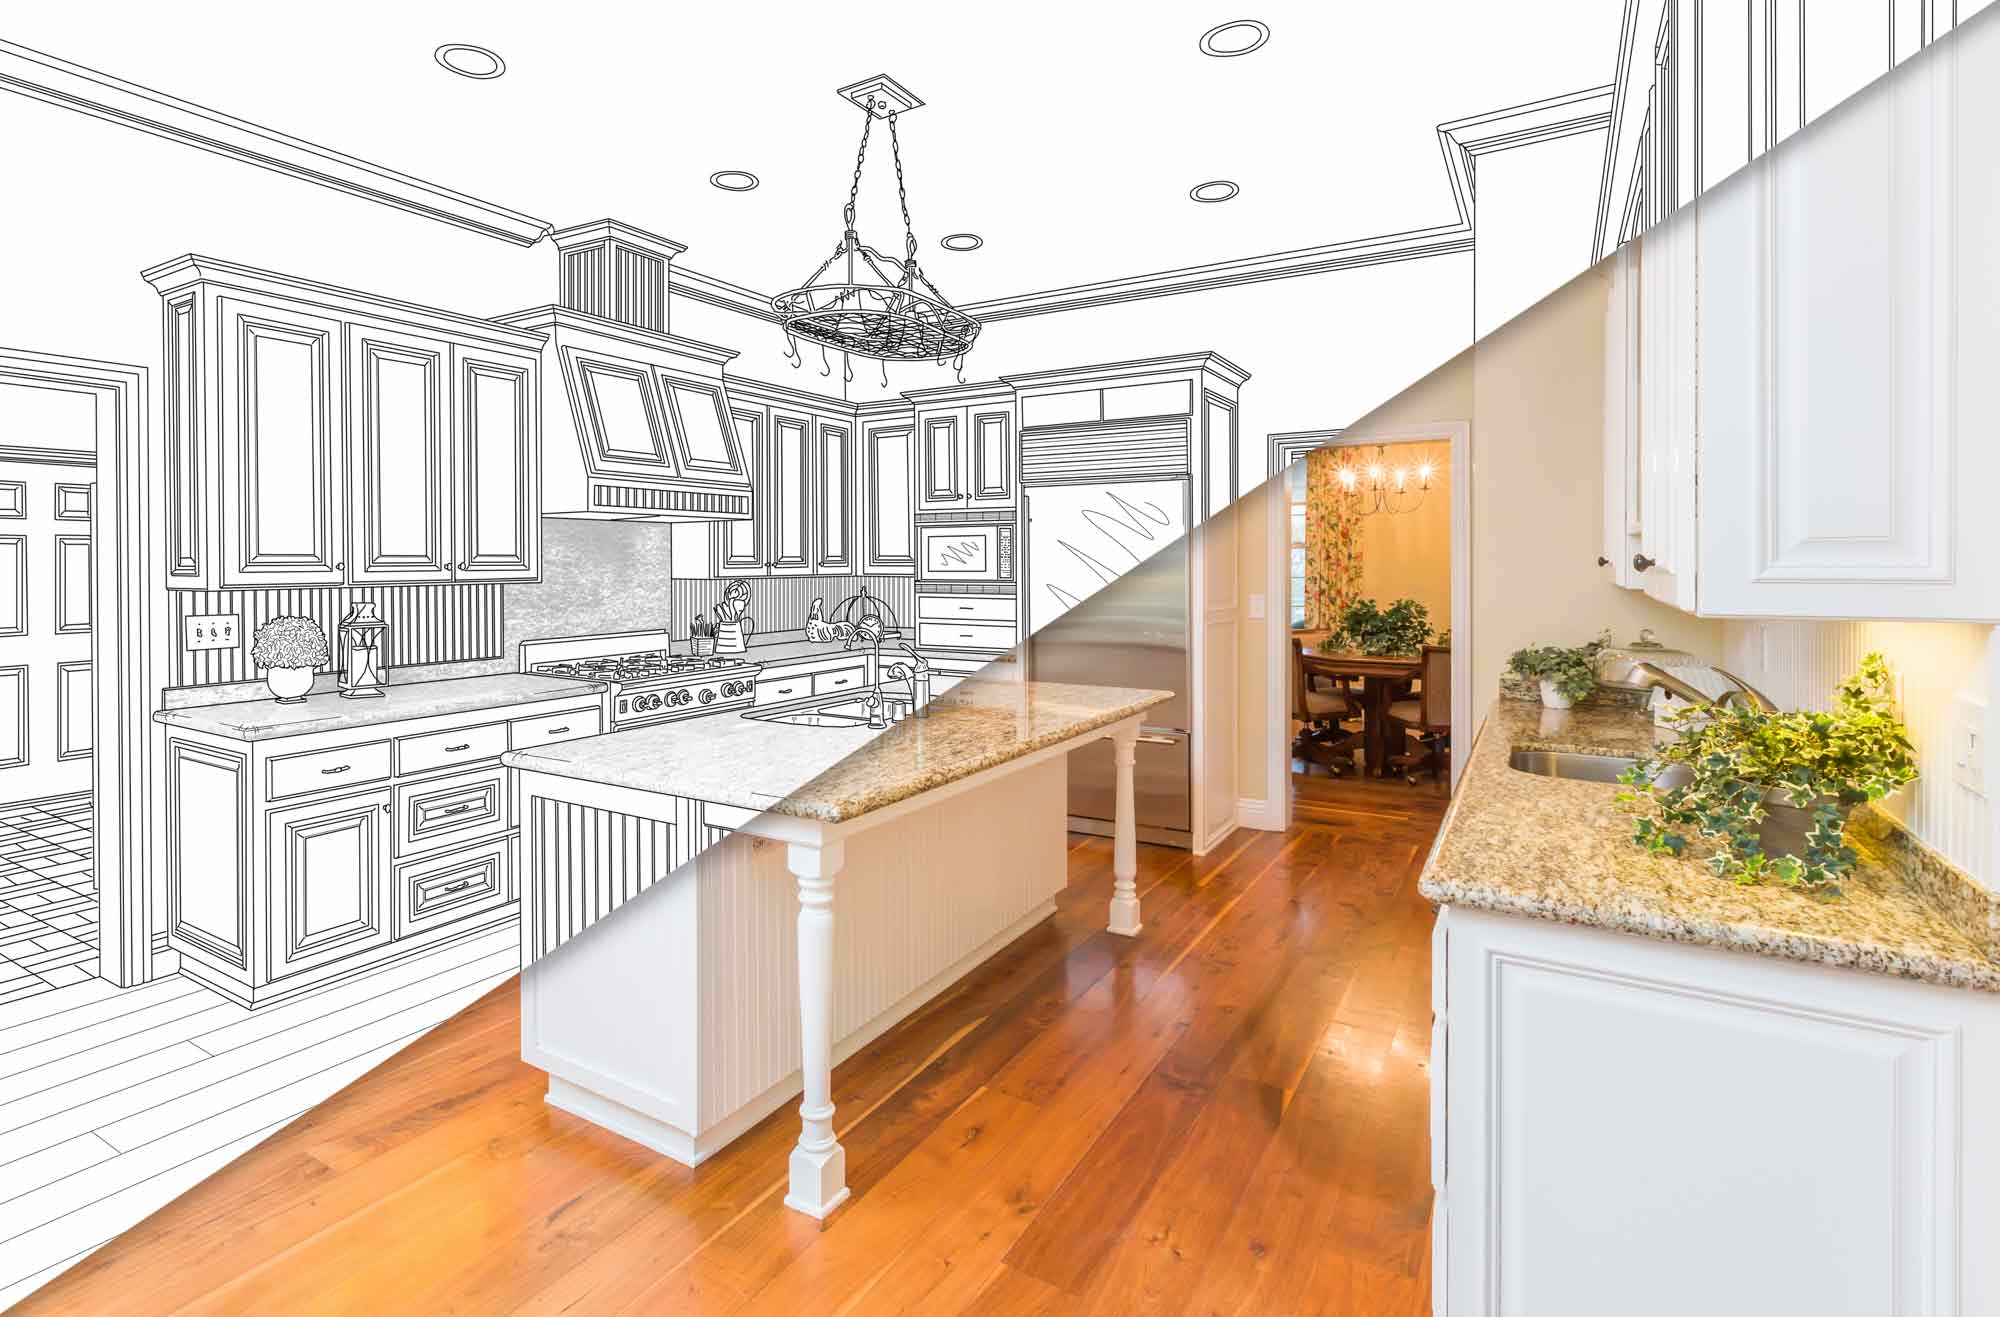 What Are The Benefits Of Kitchen Remodeling?